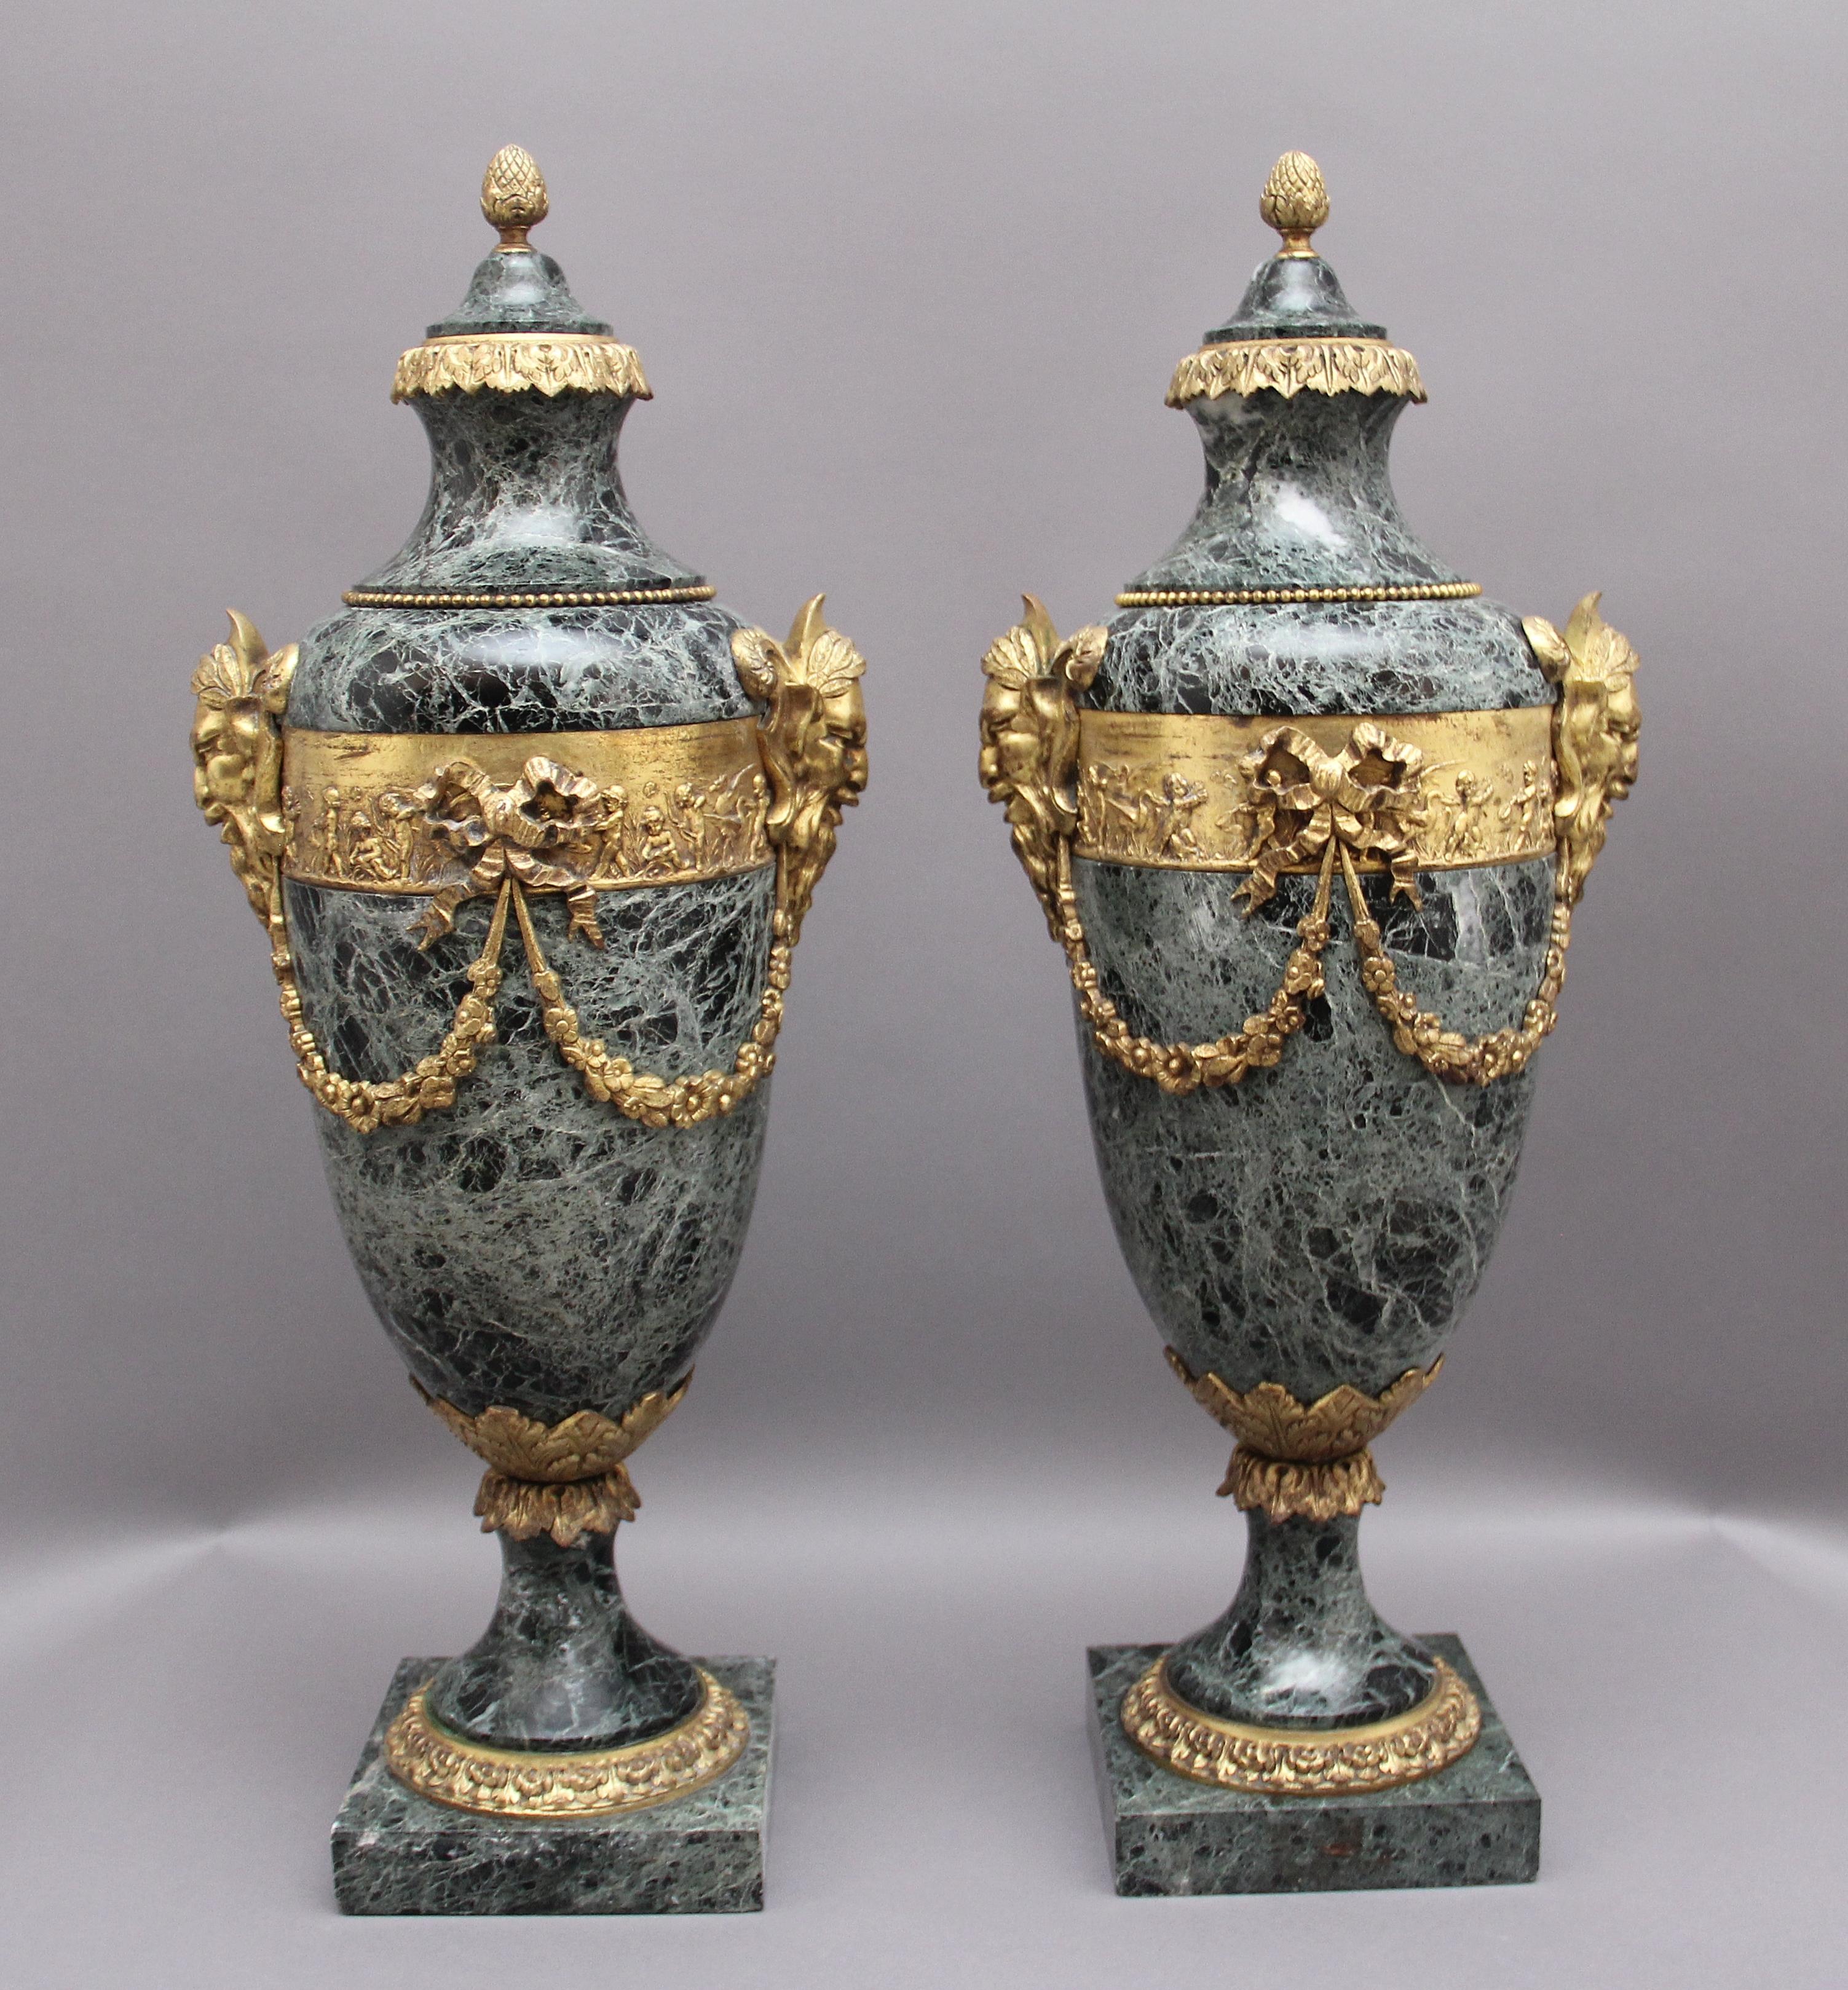 A stunning pair of French 19th Century marble and ormolu cassoulet urns, the green marble urns decorated with lovely quality ormolu including the finial and floral sash, either sides of the urns are ormolu satyr masks, ornate ormolu beading at the